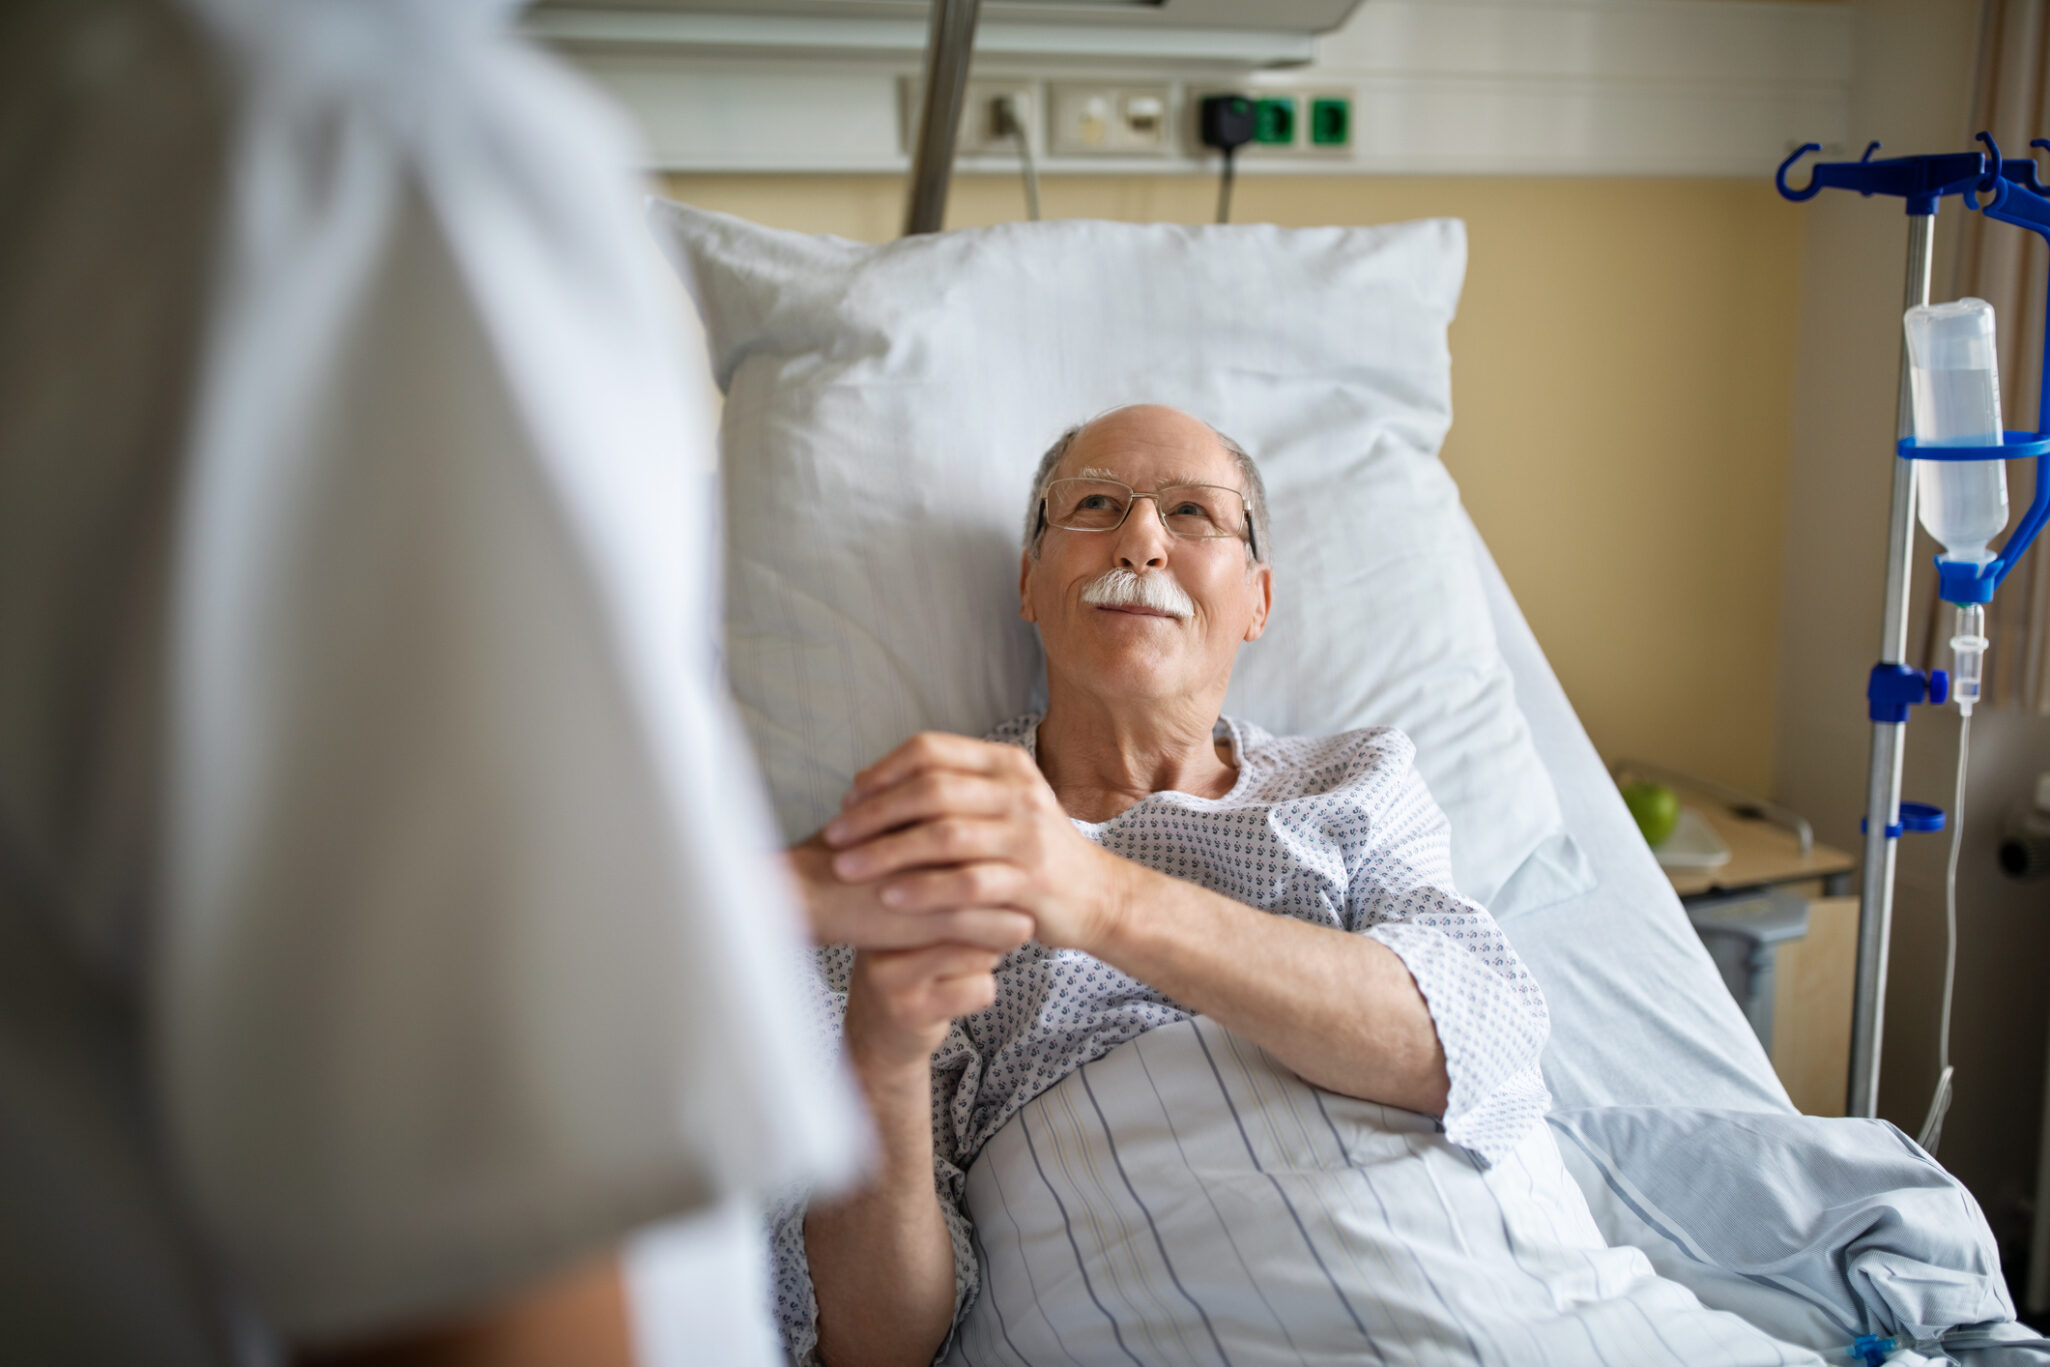 Senior man in a hospital bed holding the hands of a health care professional